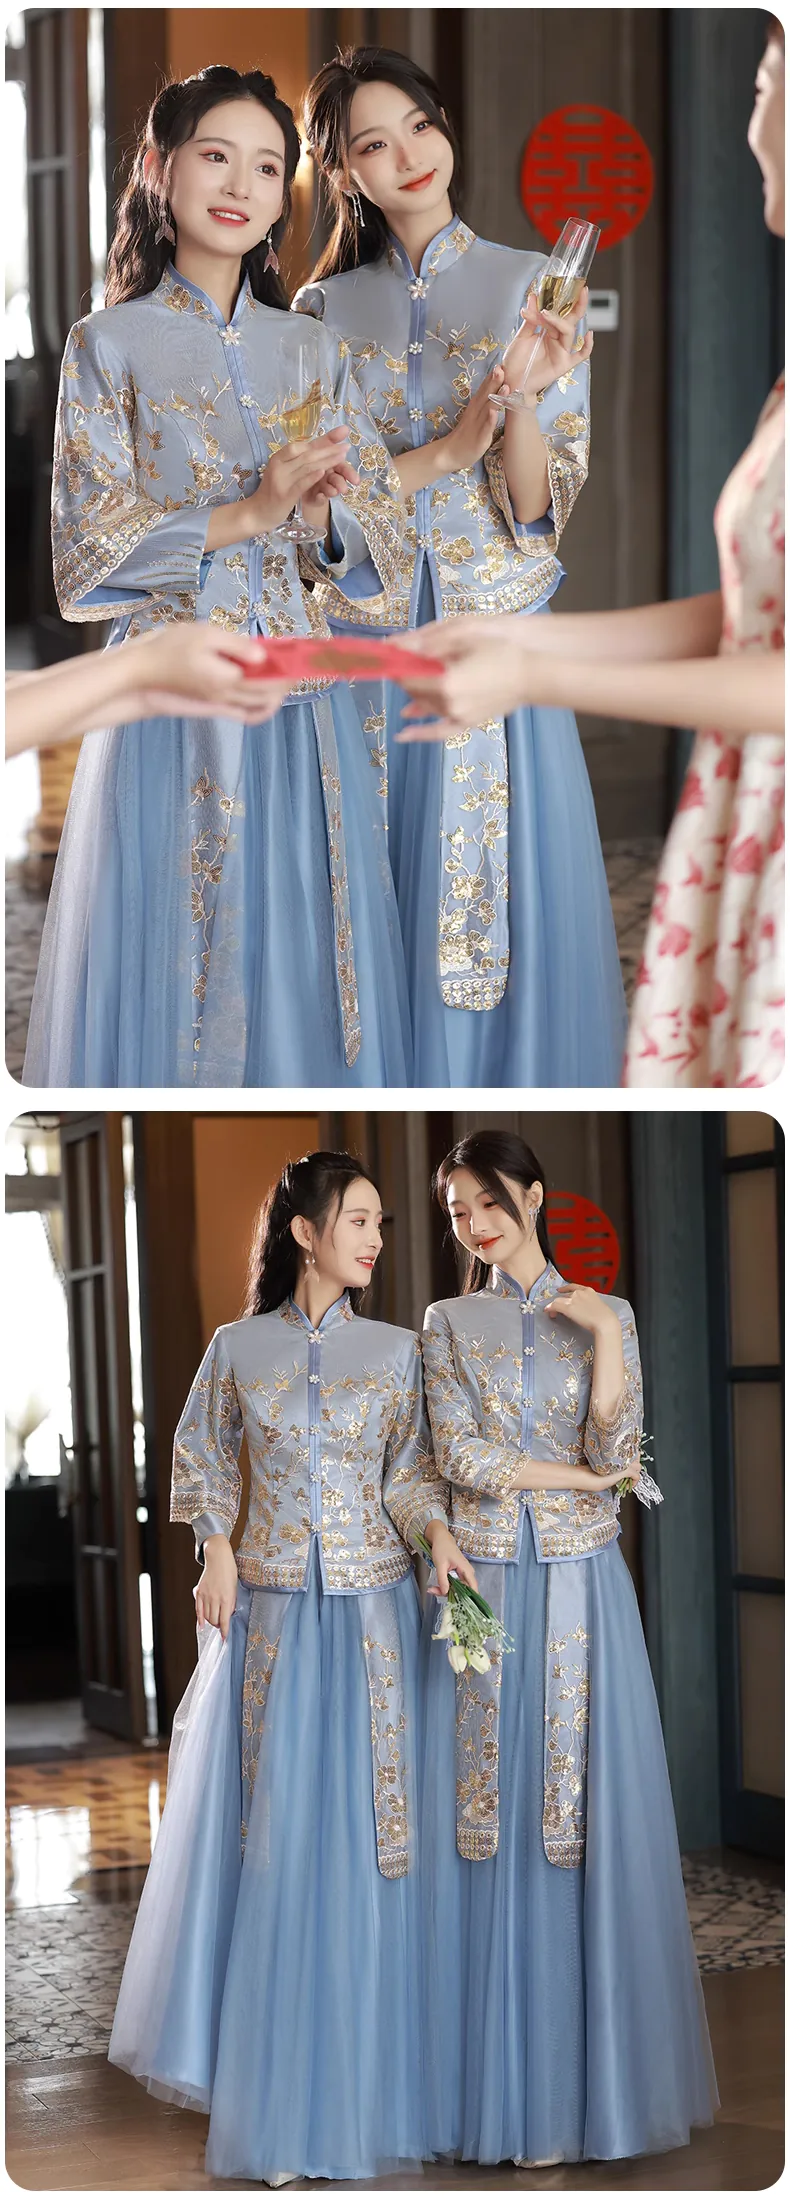 Chinese-Traditional-Style-Blue-Bridal-Wedding-Party-Bridesmaid-Dress20